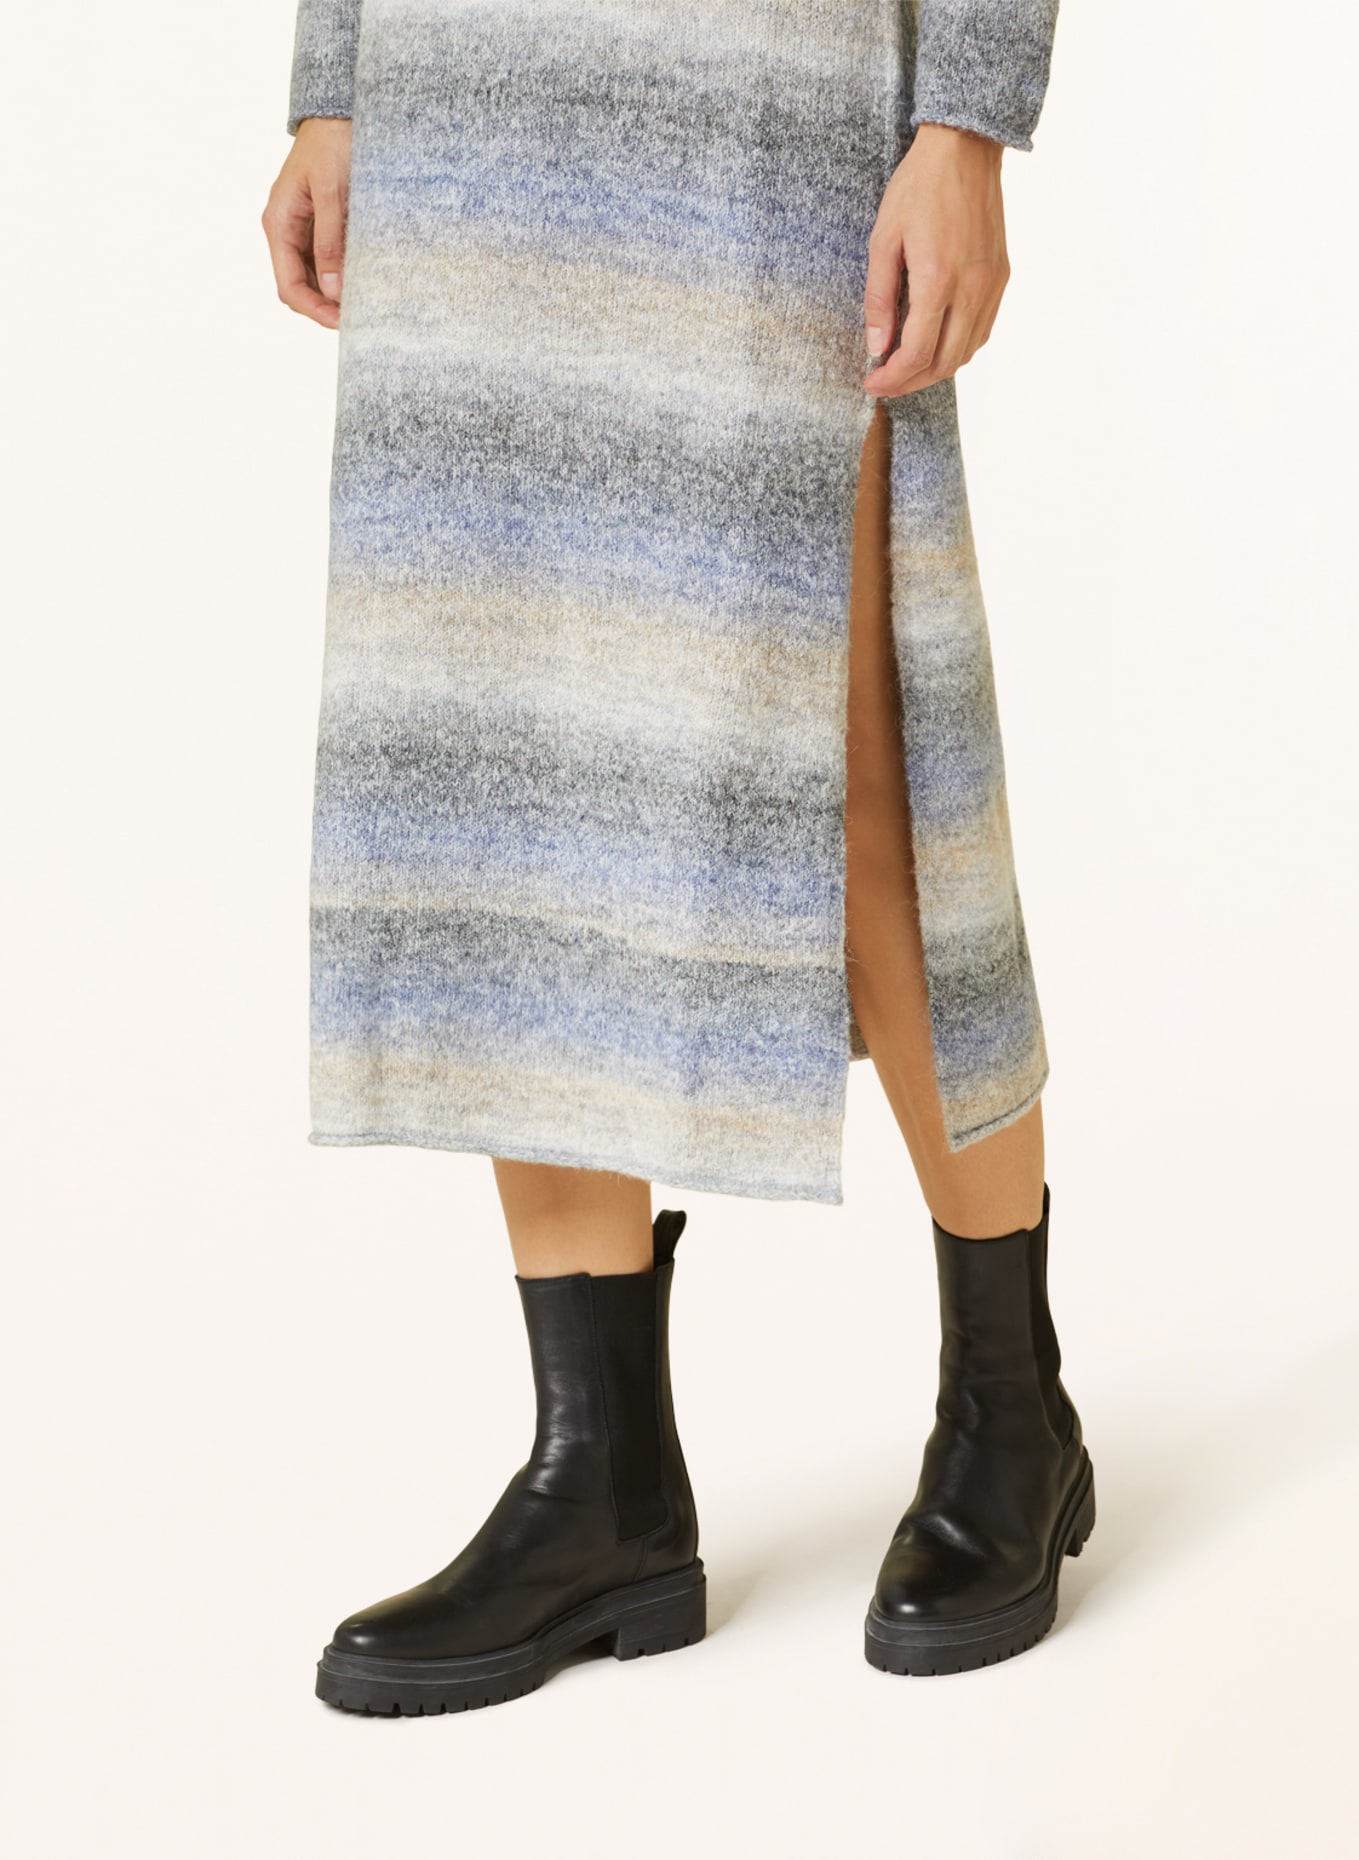 Pepe Jeans Knit dress EDITH, Color: BLUE GRAY/ LIGHT GRAY/ GRAY (Image 4)